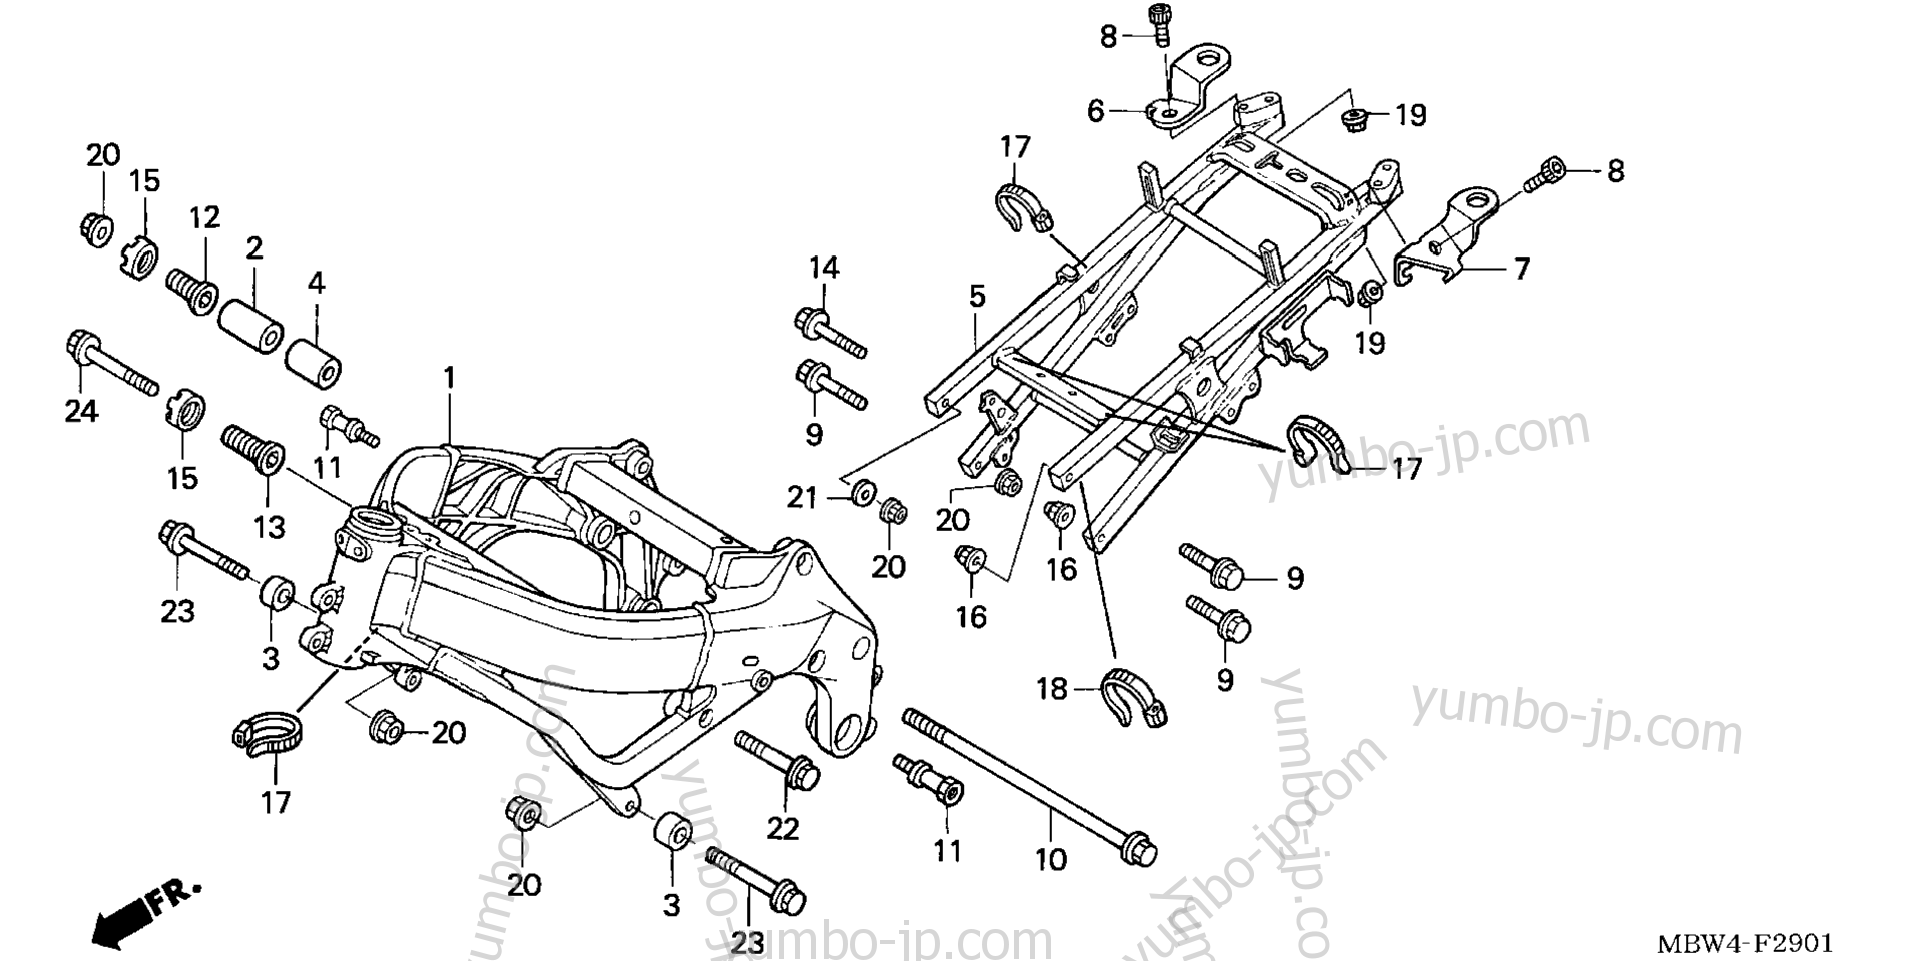 FRAME ('04-'06) for motorcycles HONDA CBR600F4 AC 2006 year